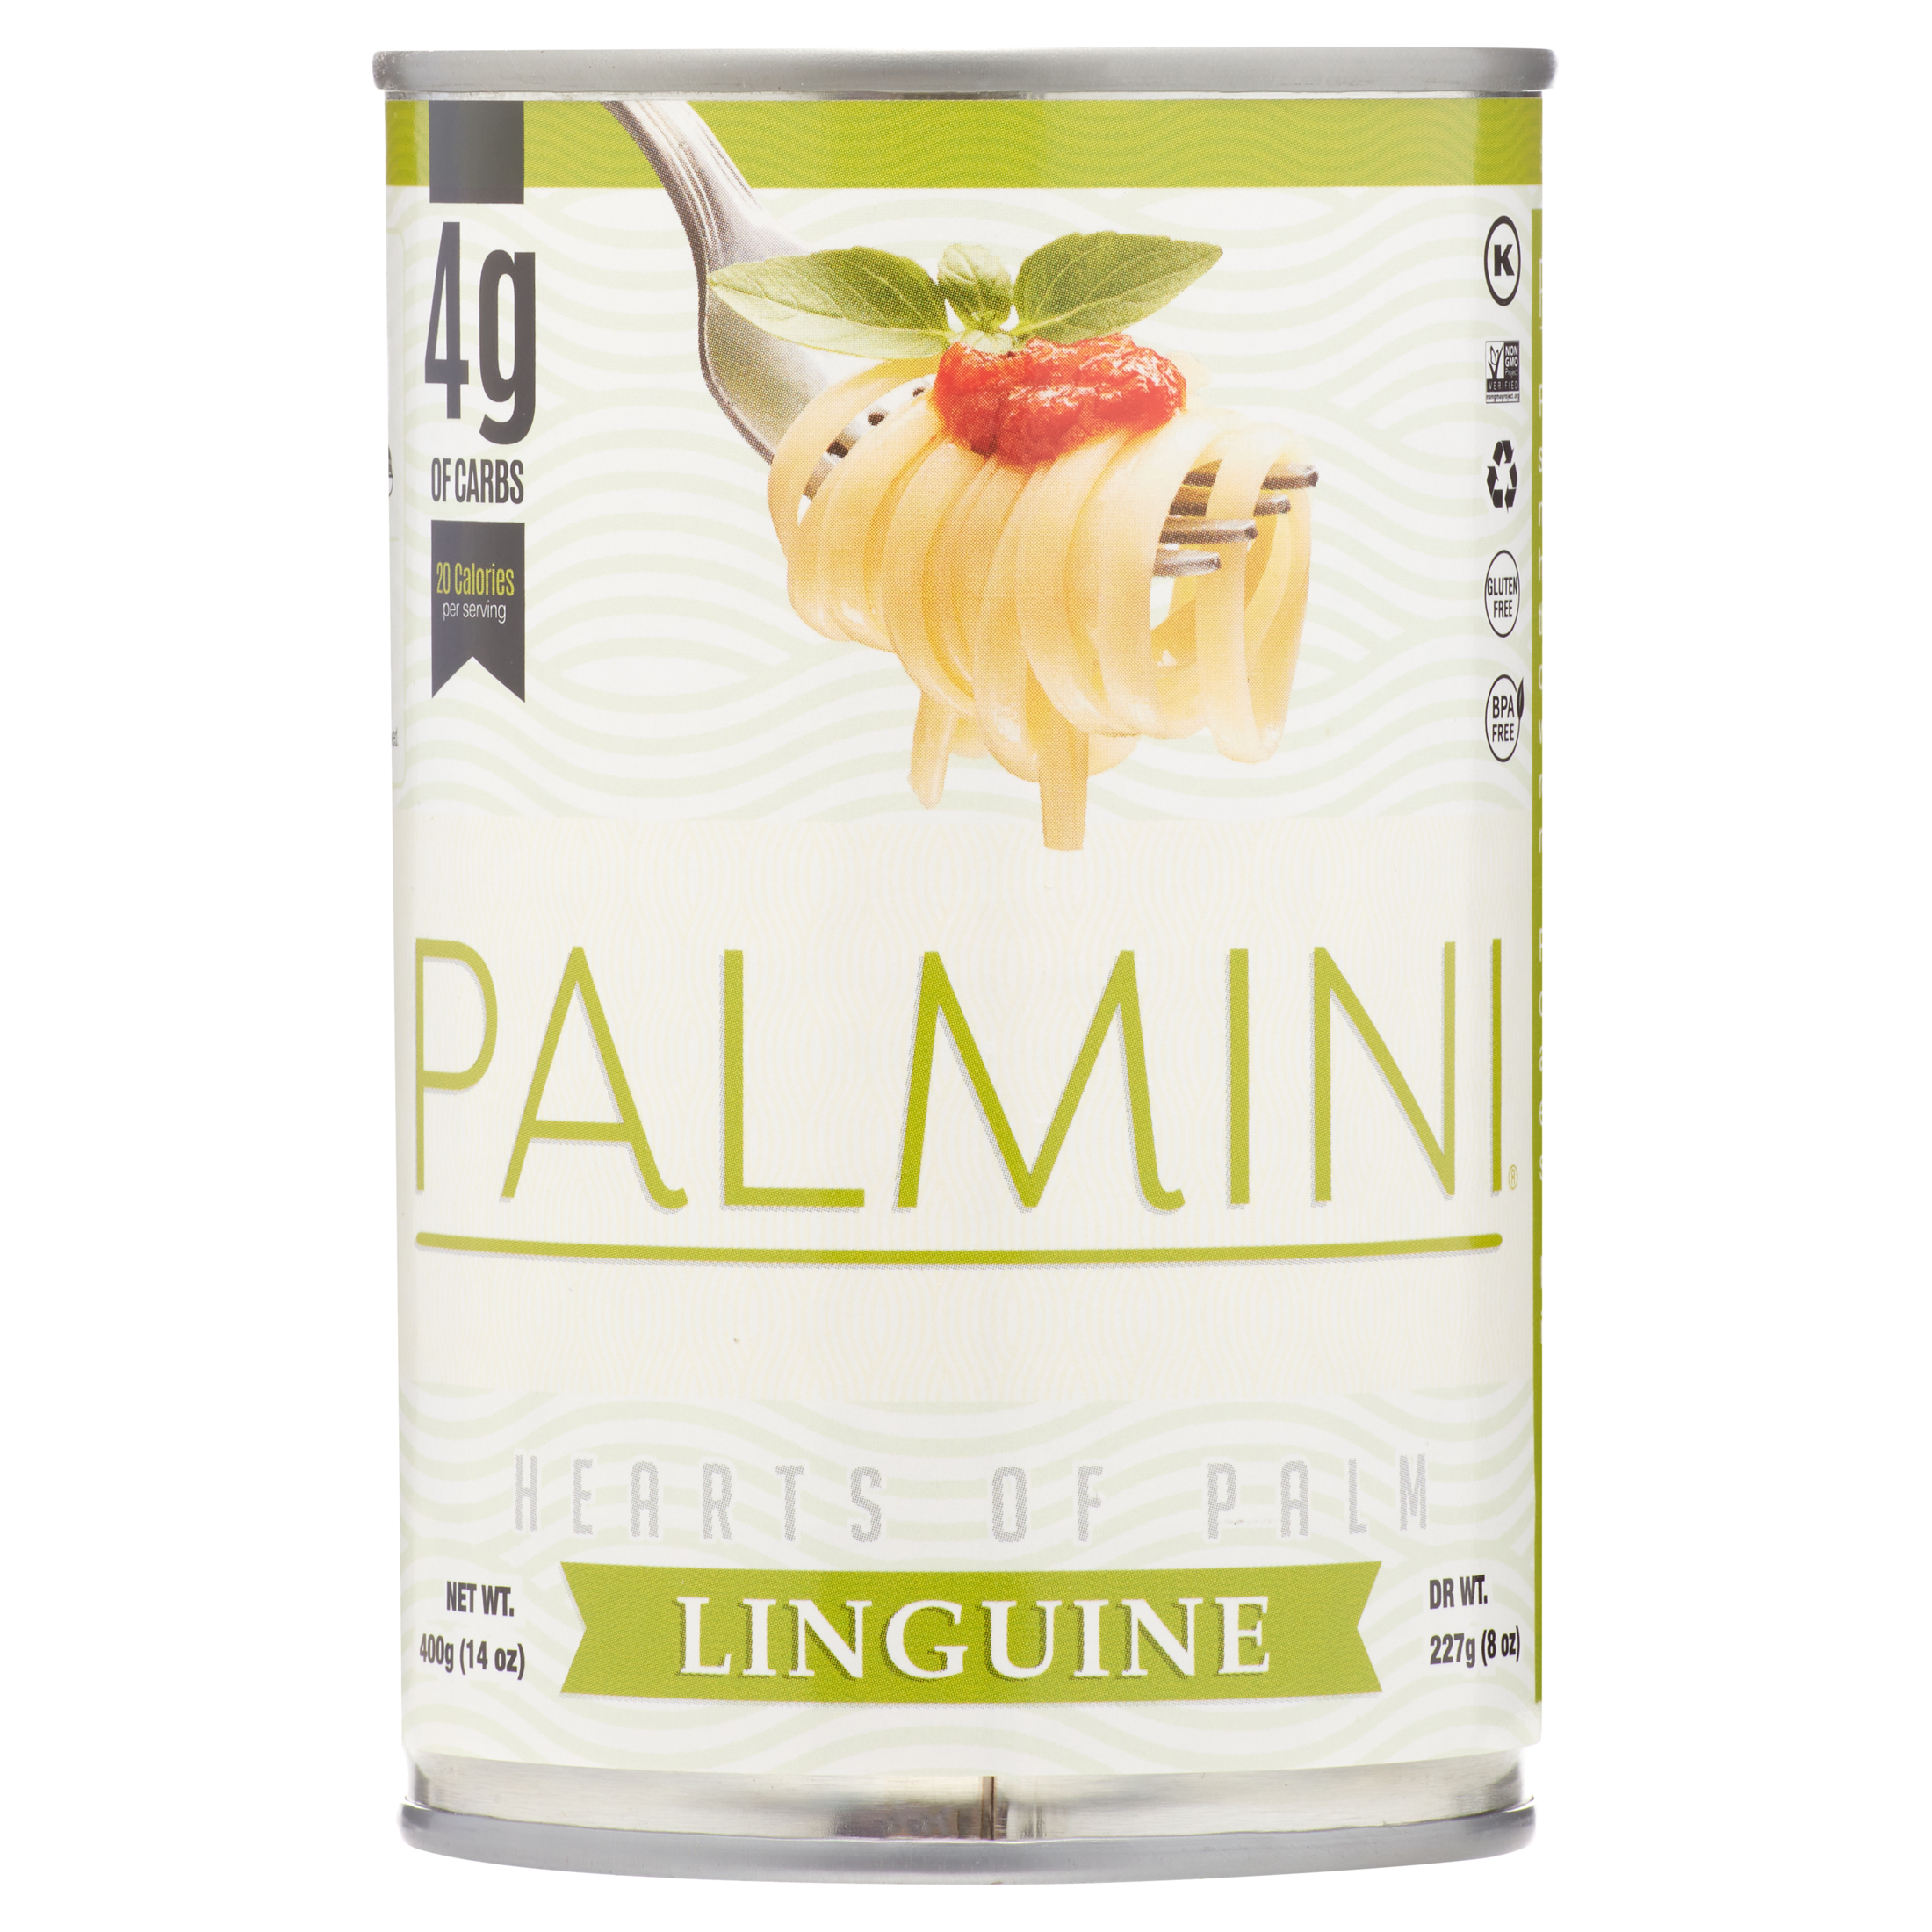 Palmini Hearts Of Palm Linguine Pasta, 14 oz Can - image 5 of 9